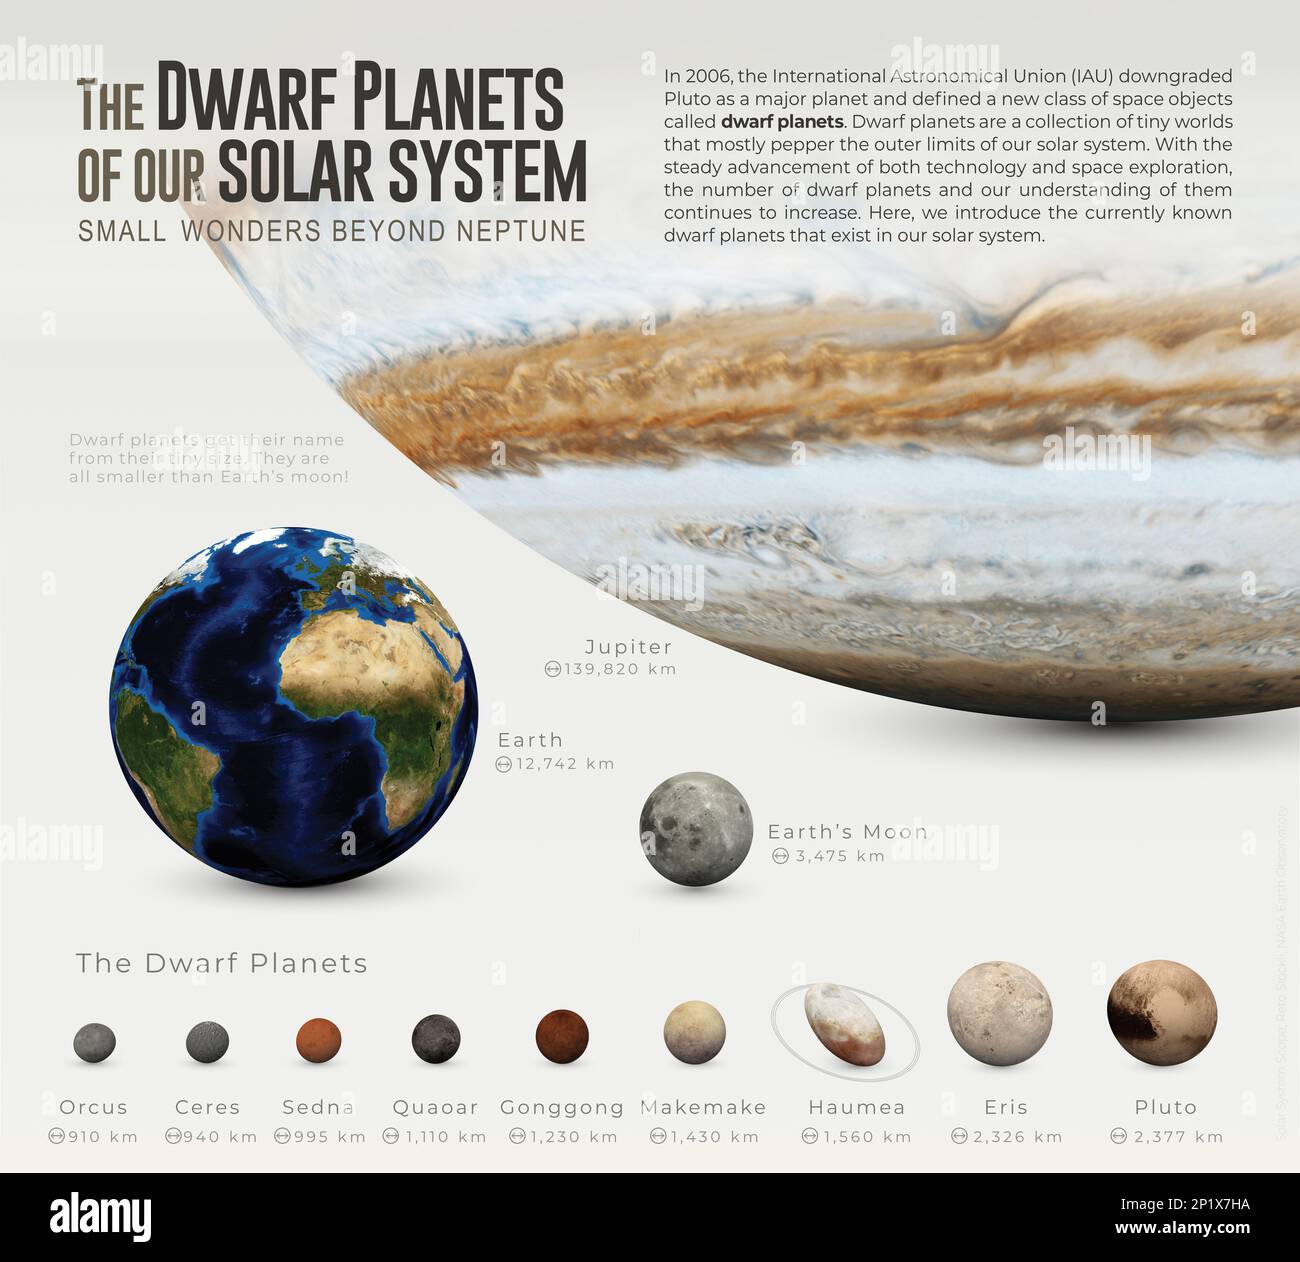 how big are dwarf planets from smallest to largest and planets